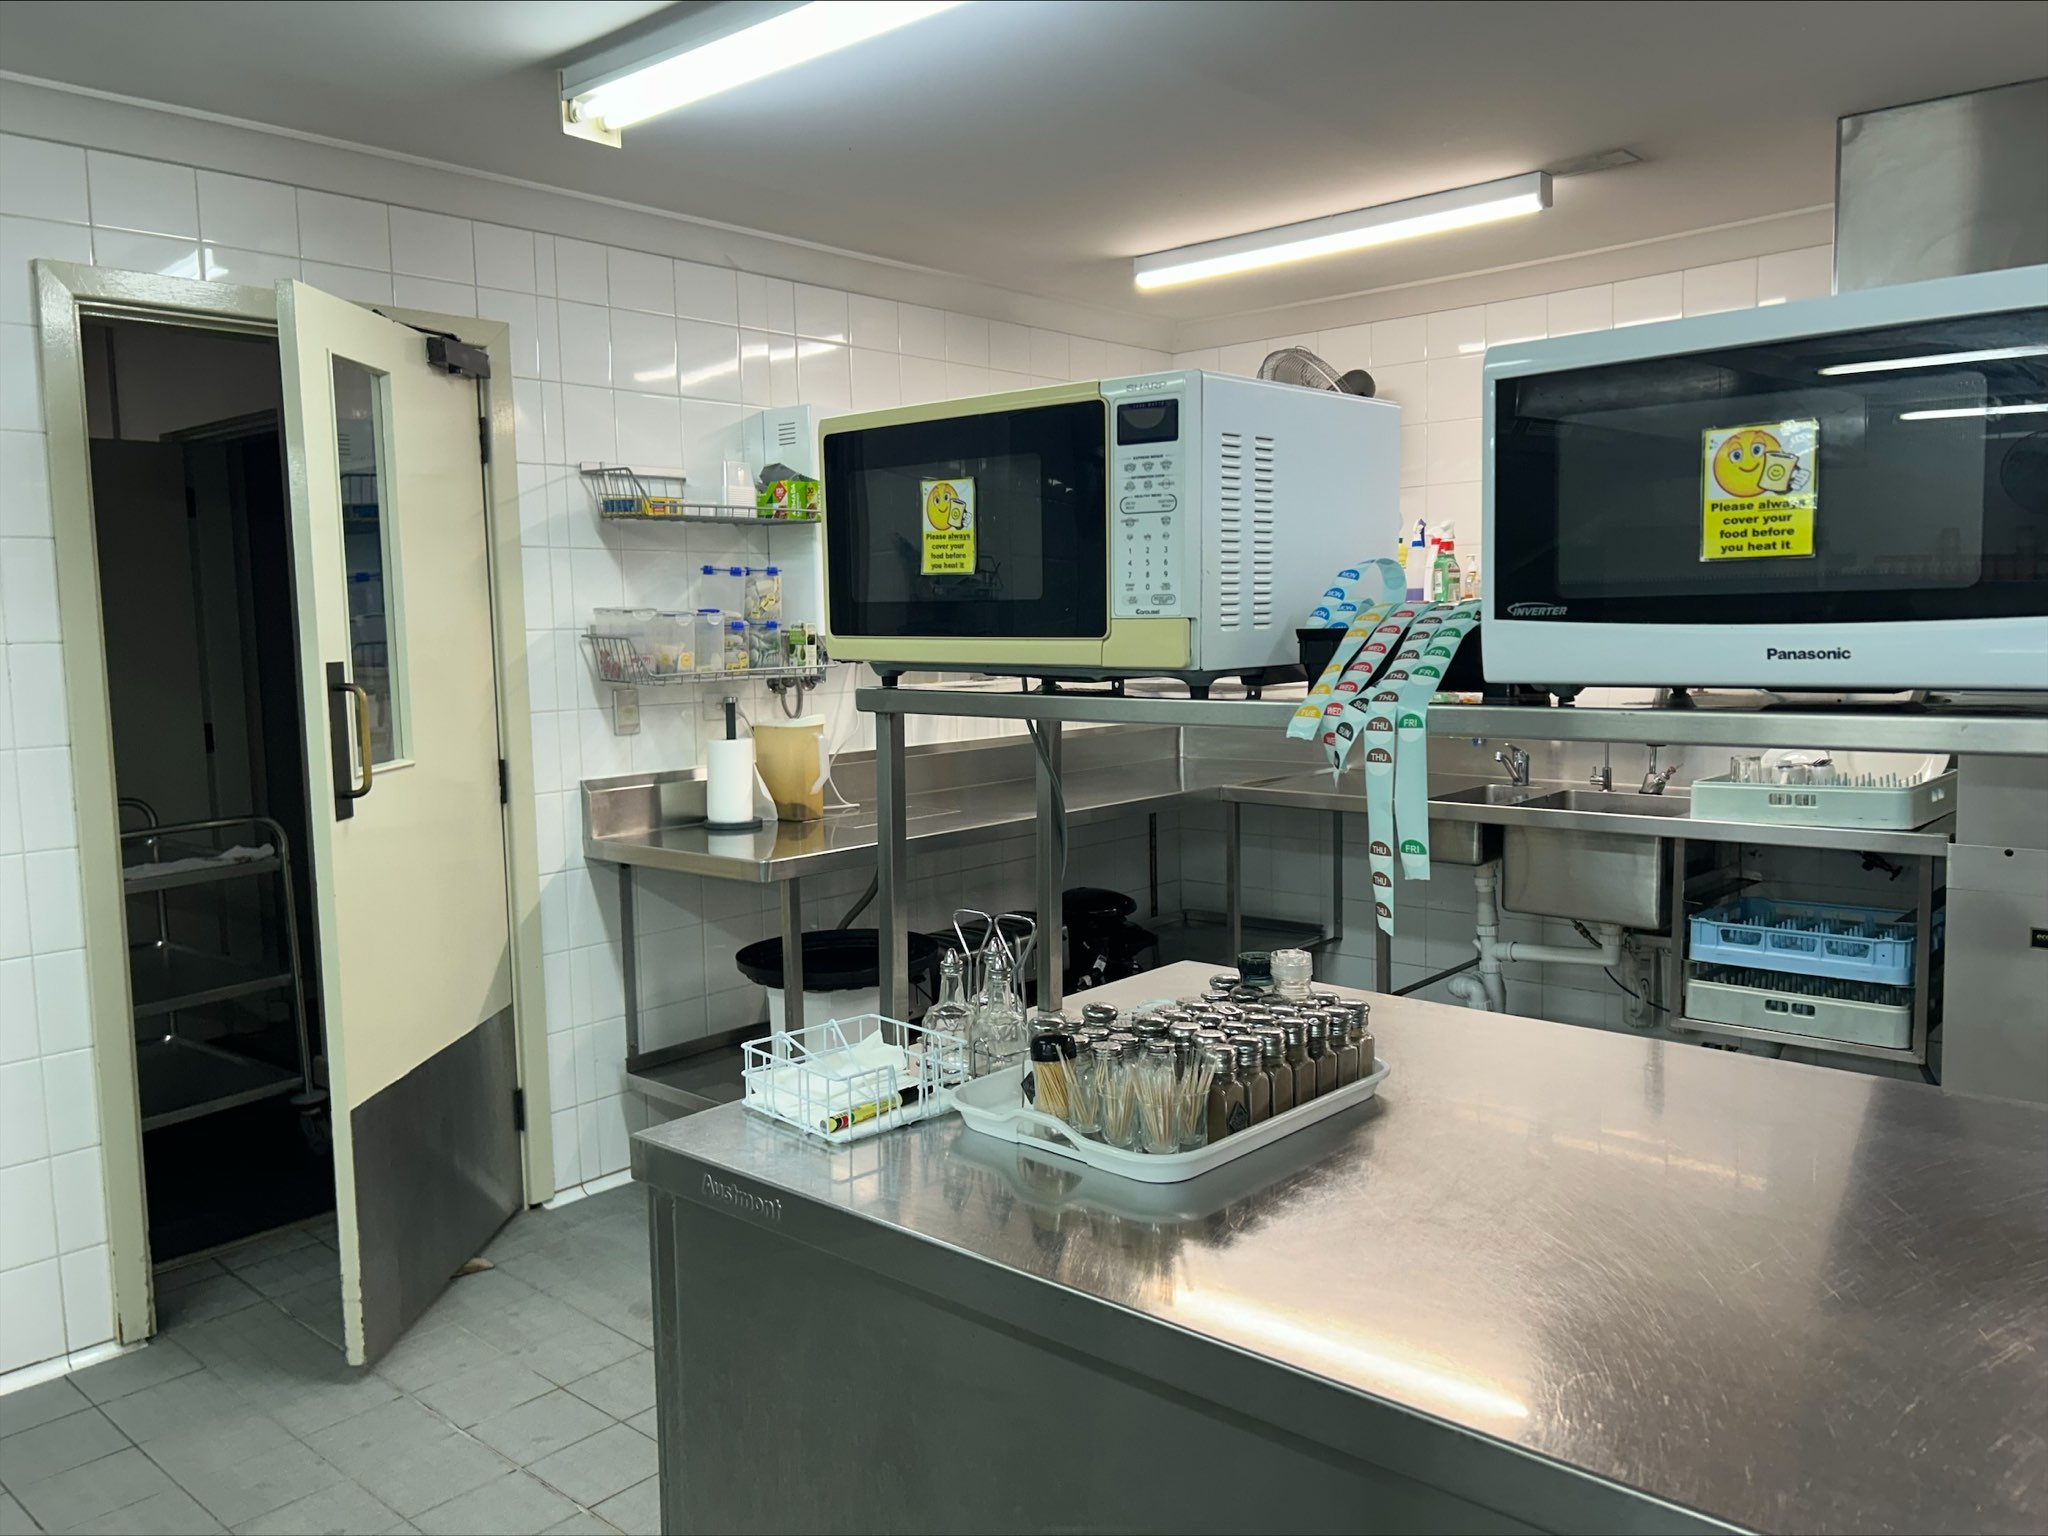 Commercial Kitchen Cleaning by Master Cleaners: Long-term Quality Cleaning Services